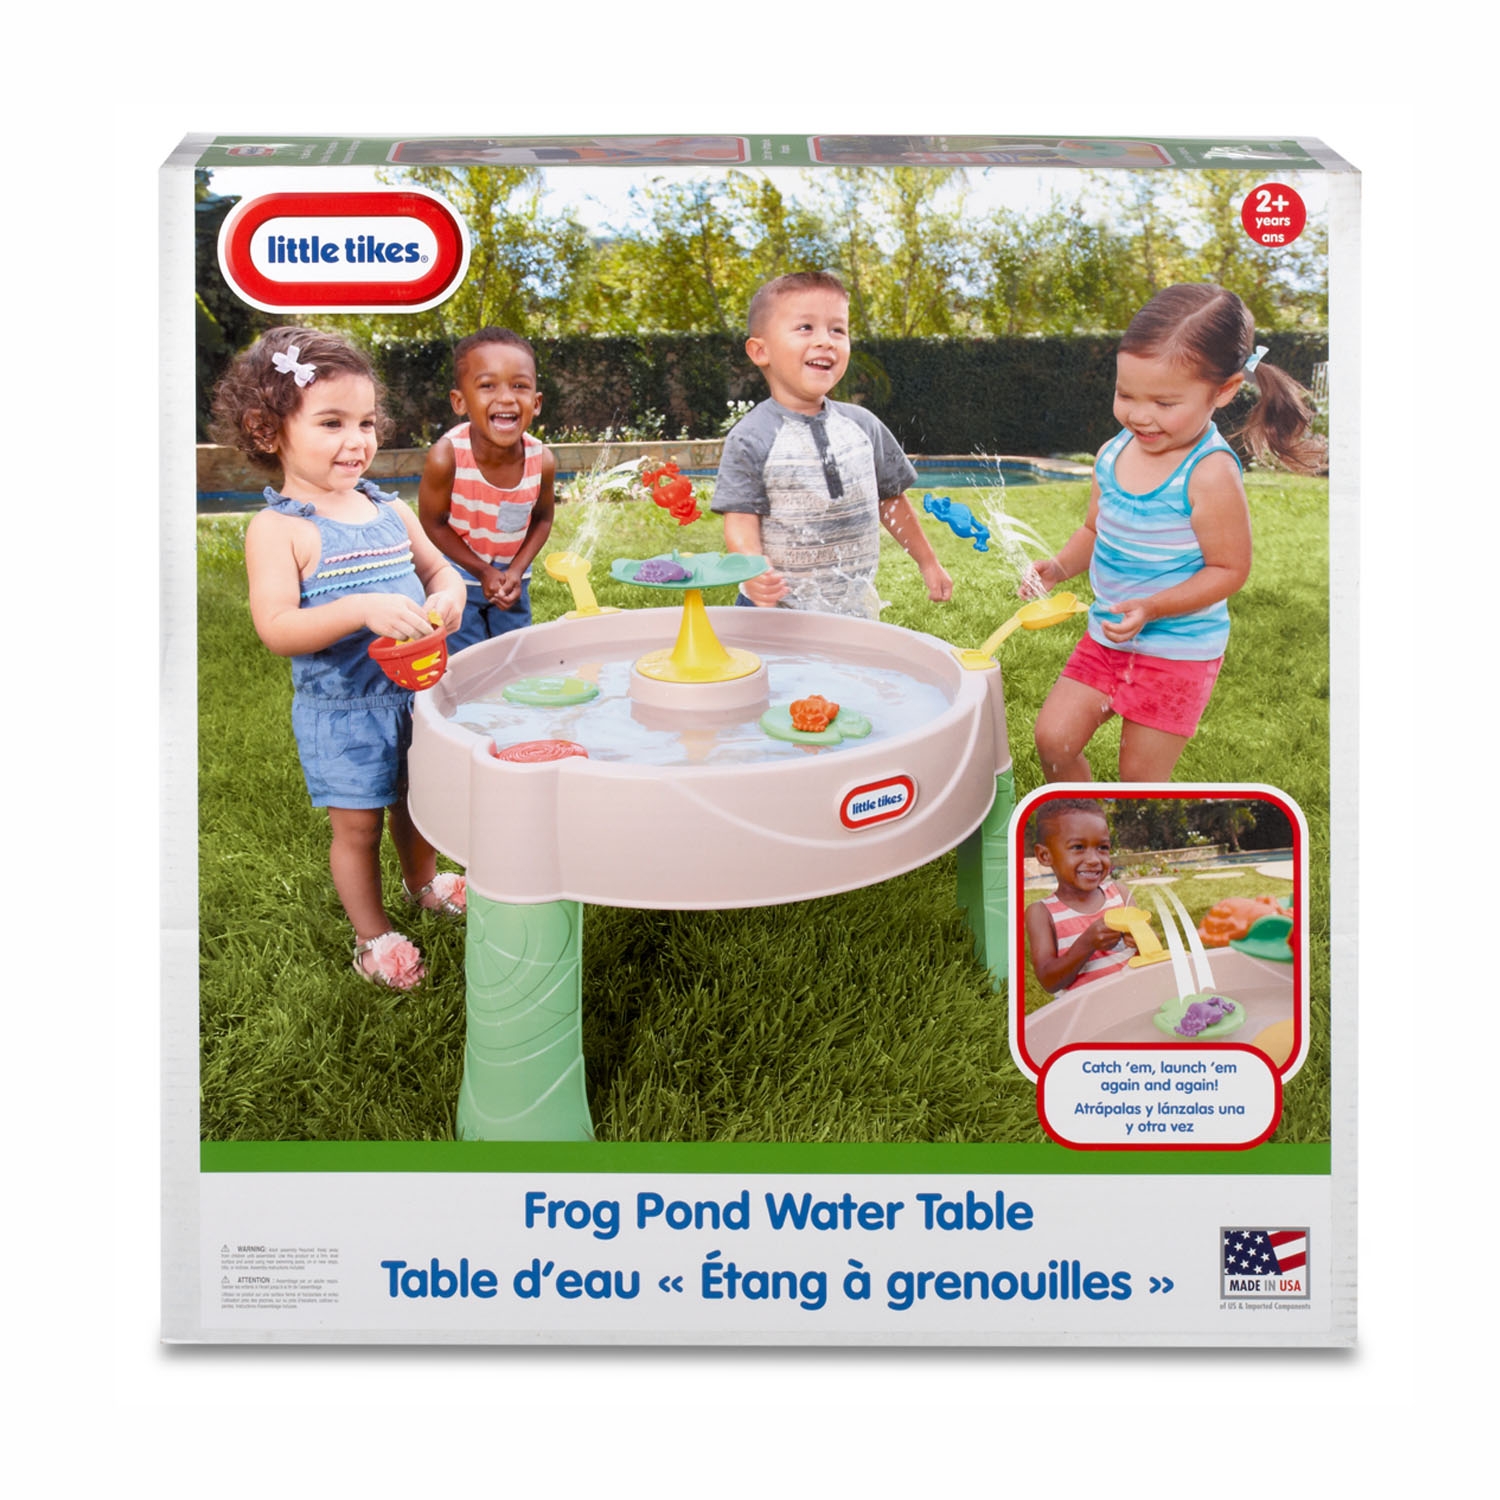 Little Tikes Frog Pond Water Table - image 6 of 6